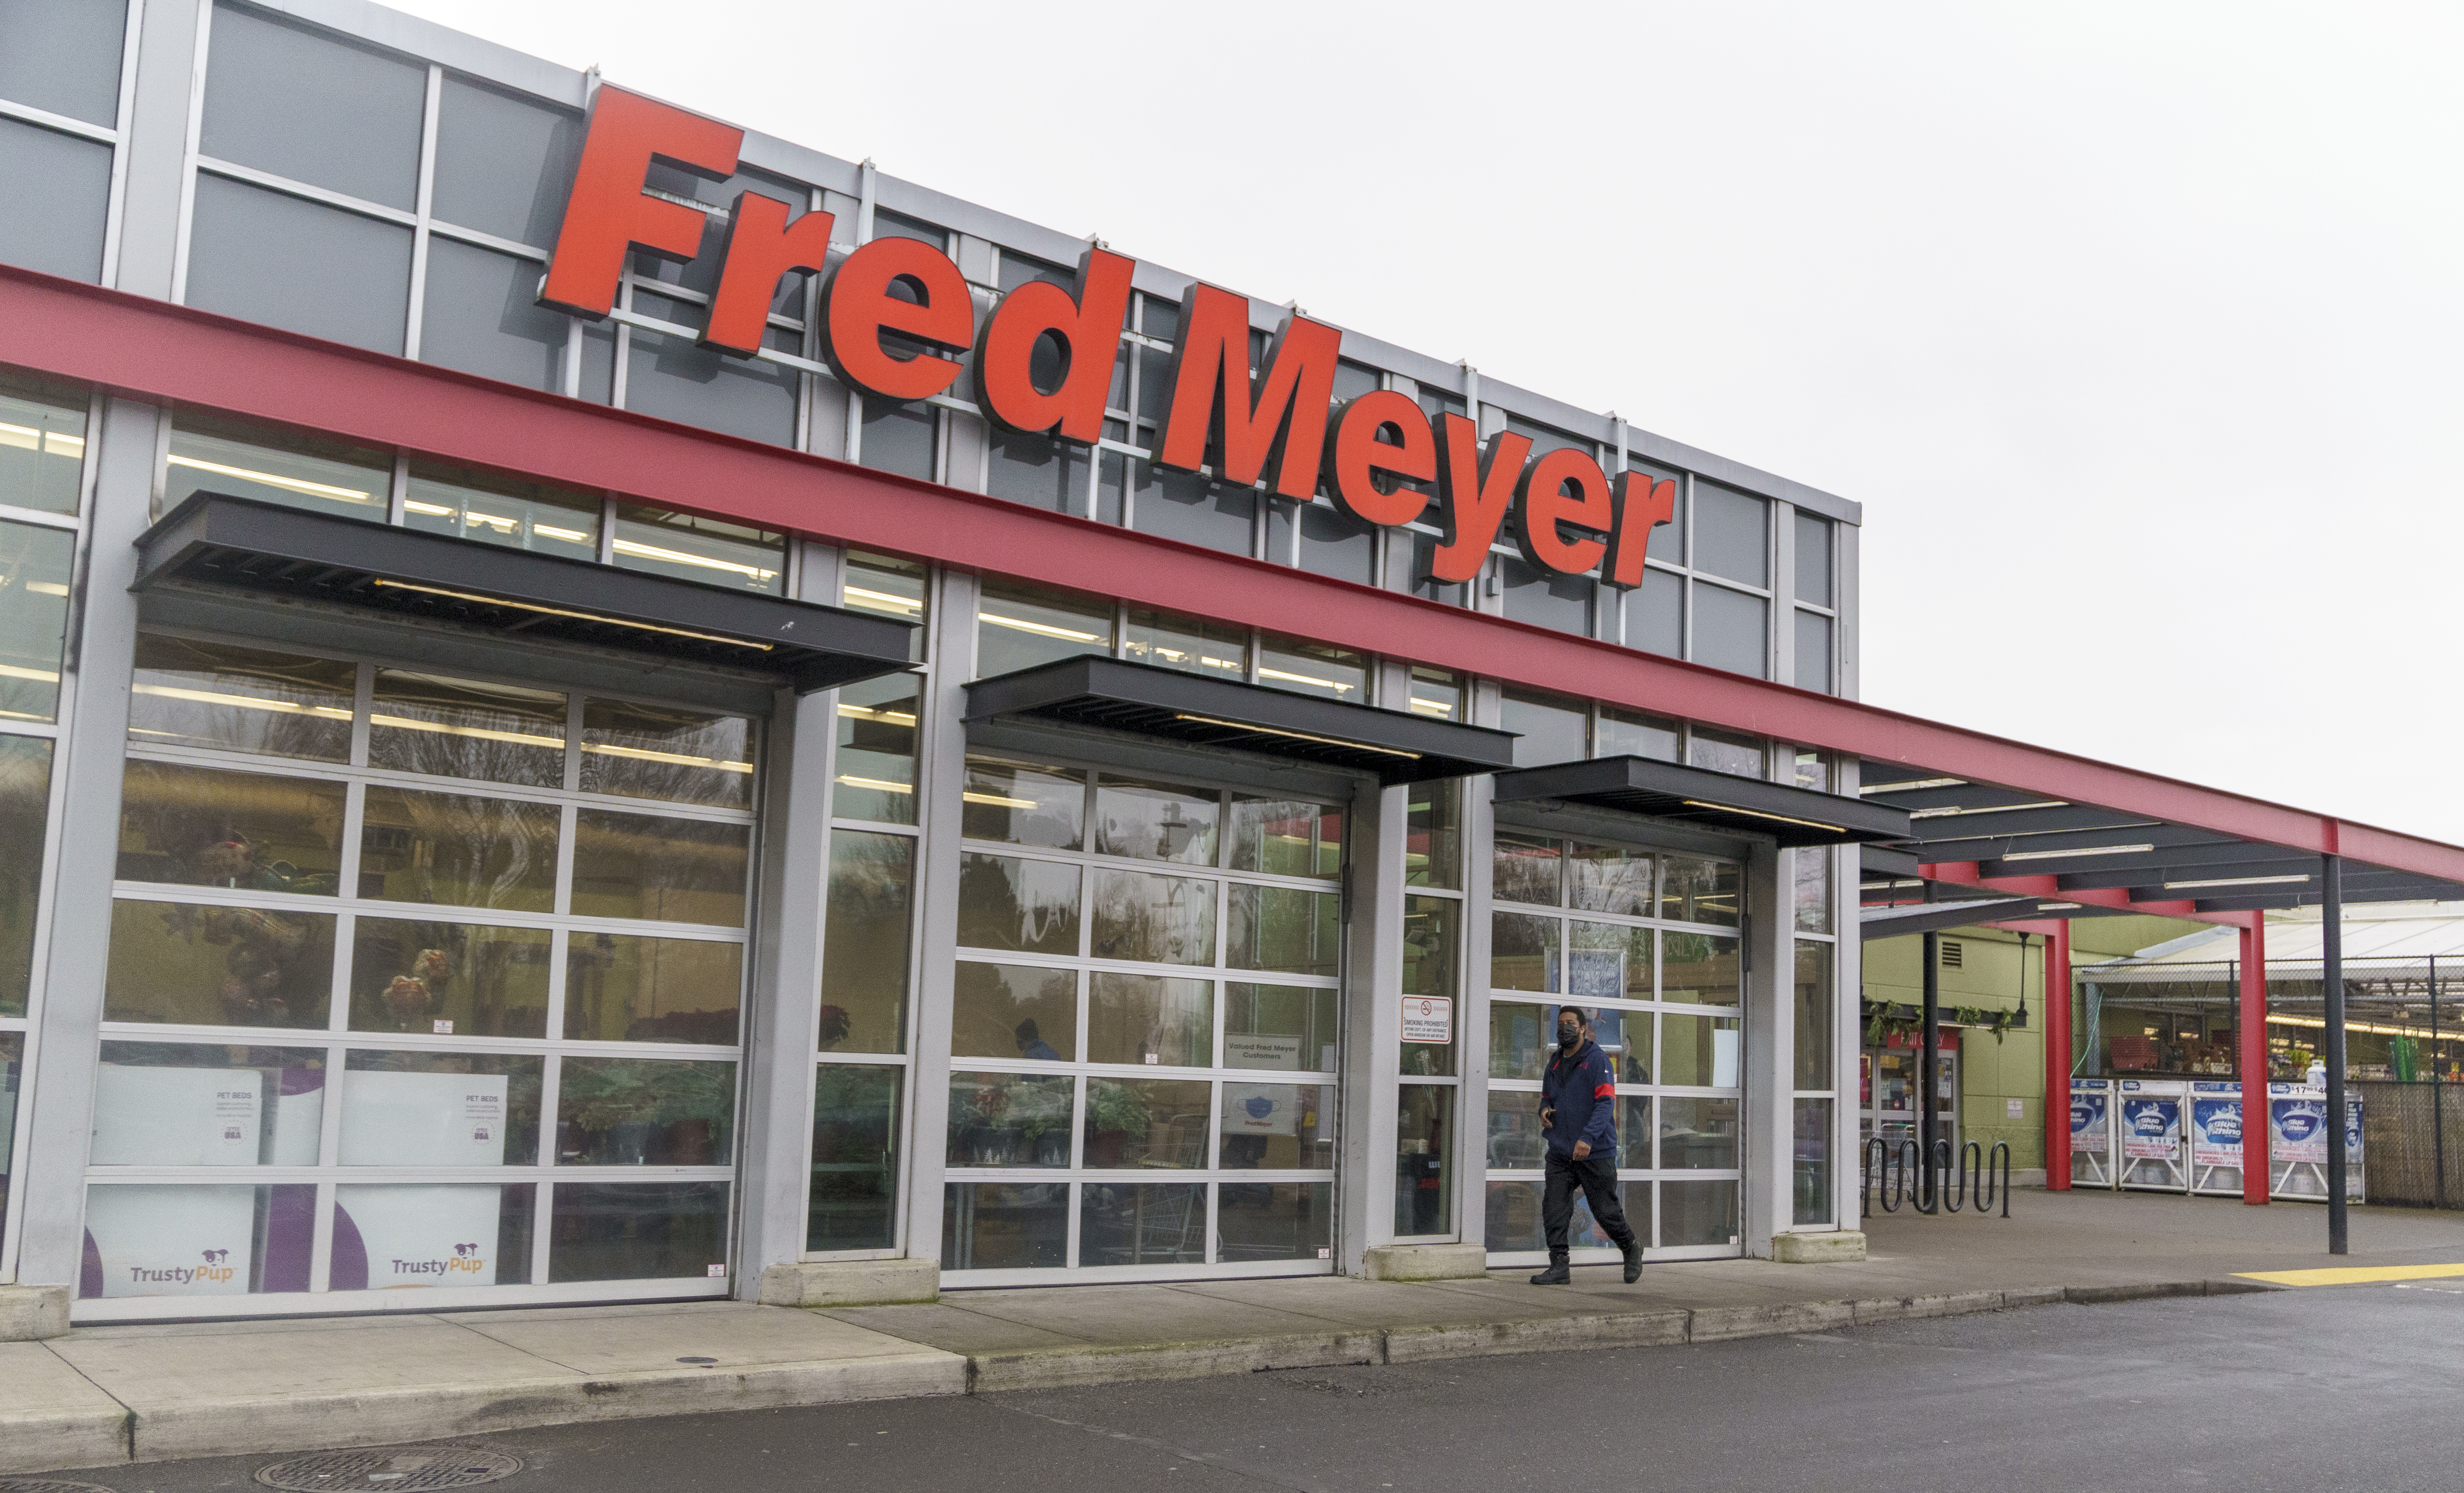 Owner of Fred Meyer aims to also own Safeway parent Albertsons in